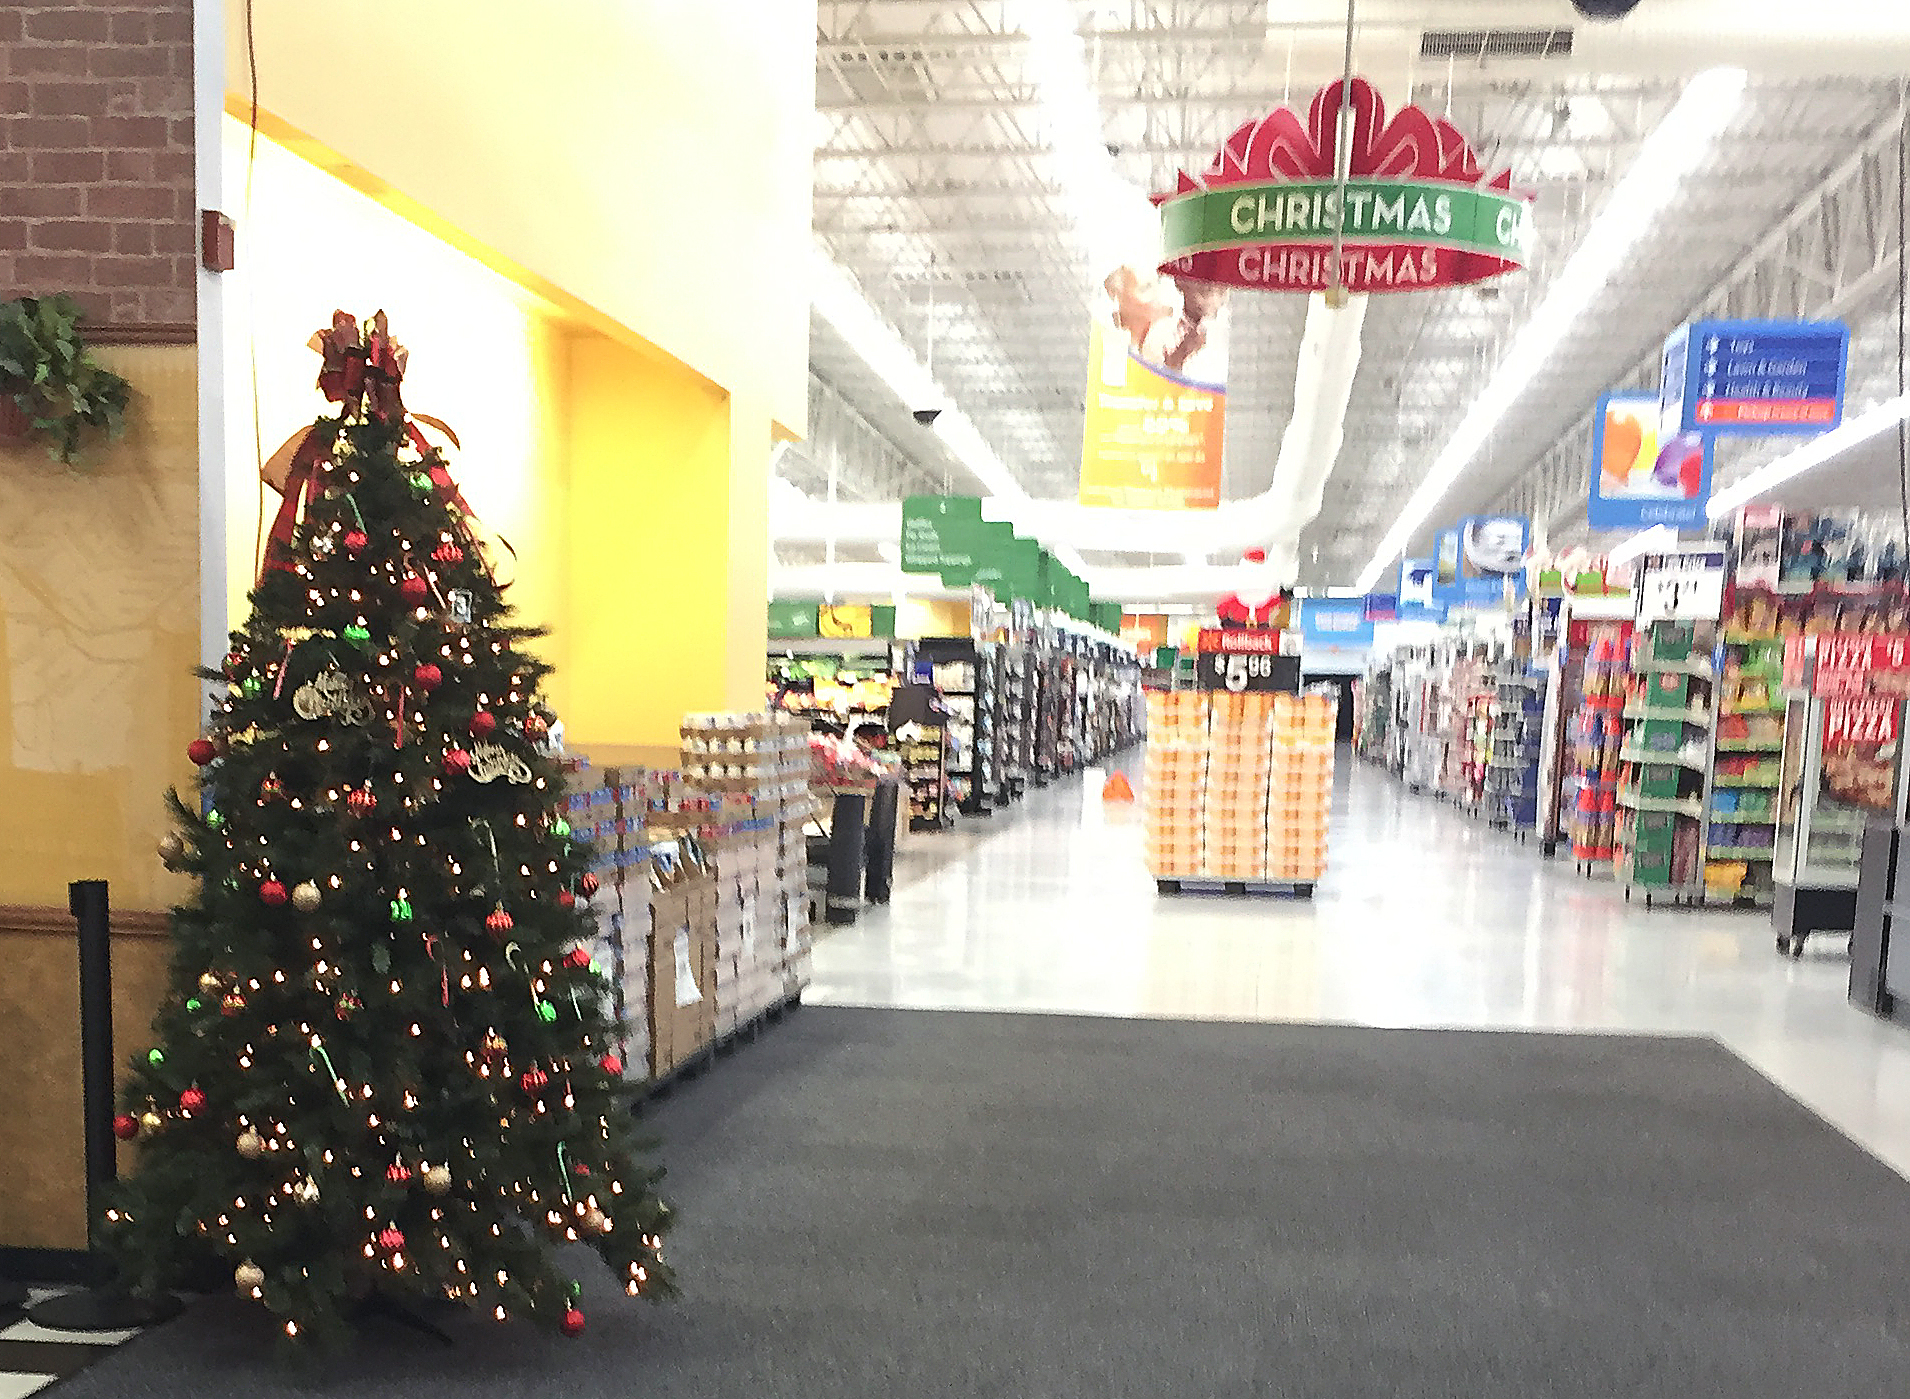 Update: Walmart replaces Christmas trees at entrances | Minden Press-Herald